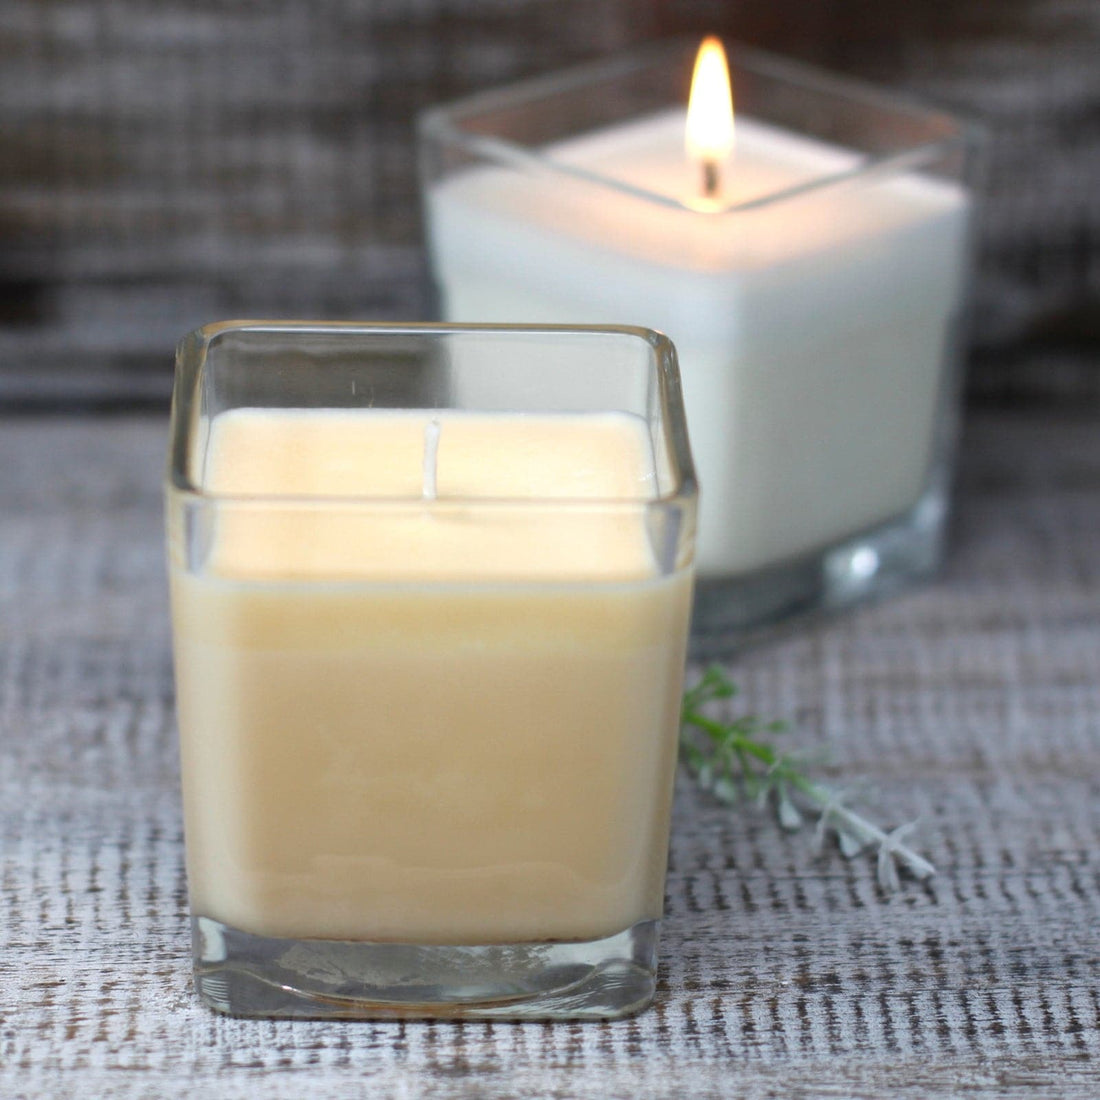 White Label Soy Wax Jar Candle - Grapefruit & Ginger - best price from Maltashopper.com WLSOYC-06